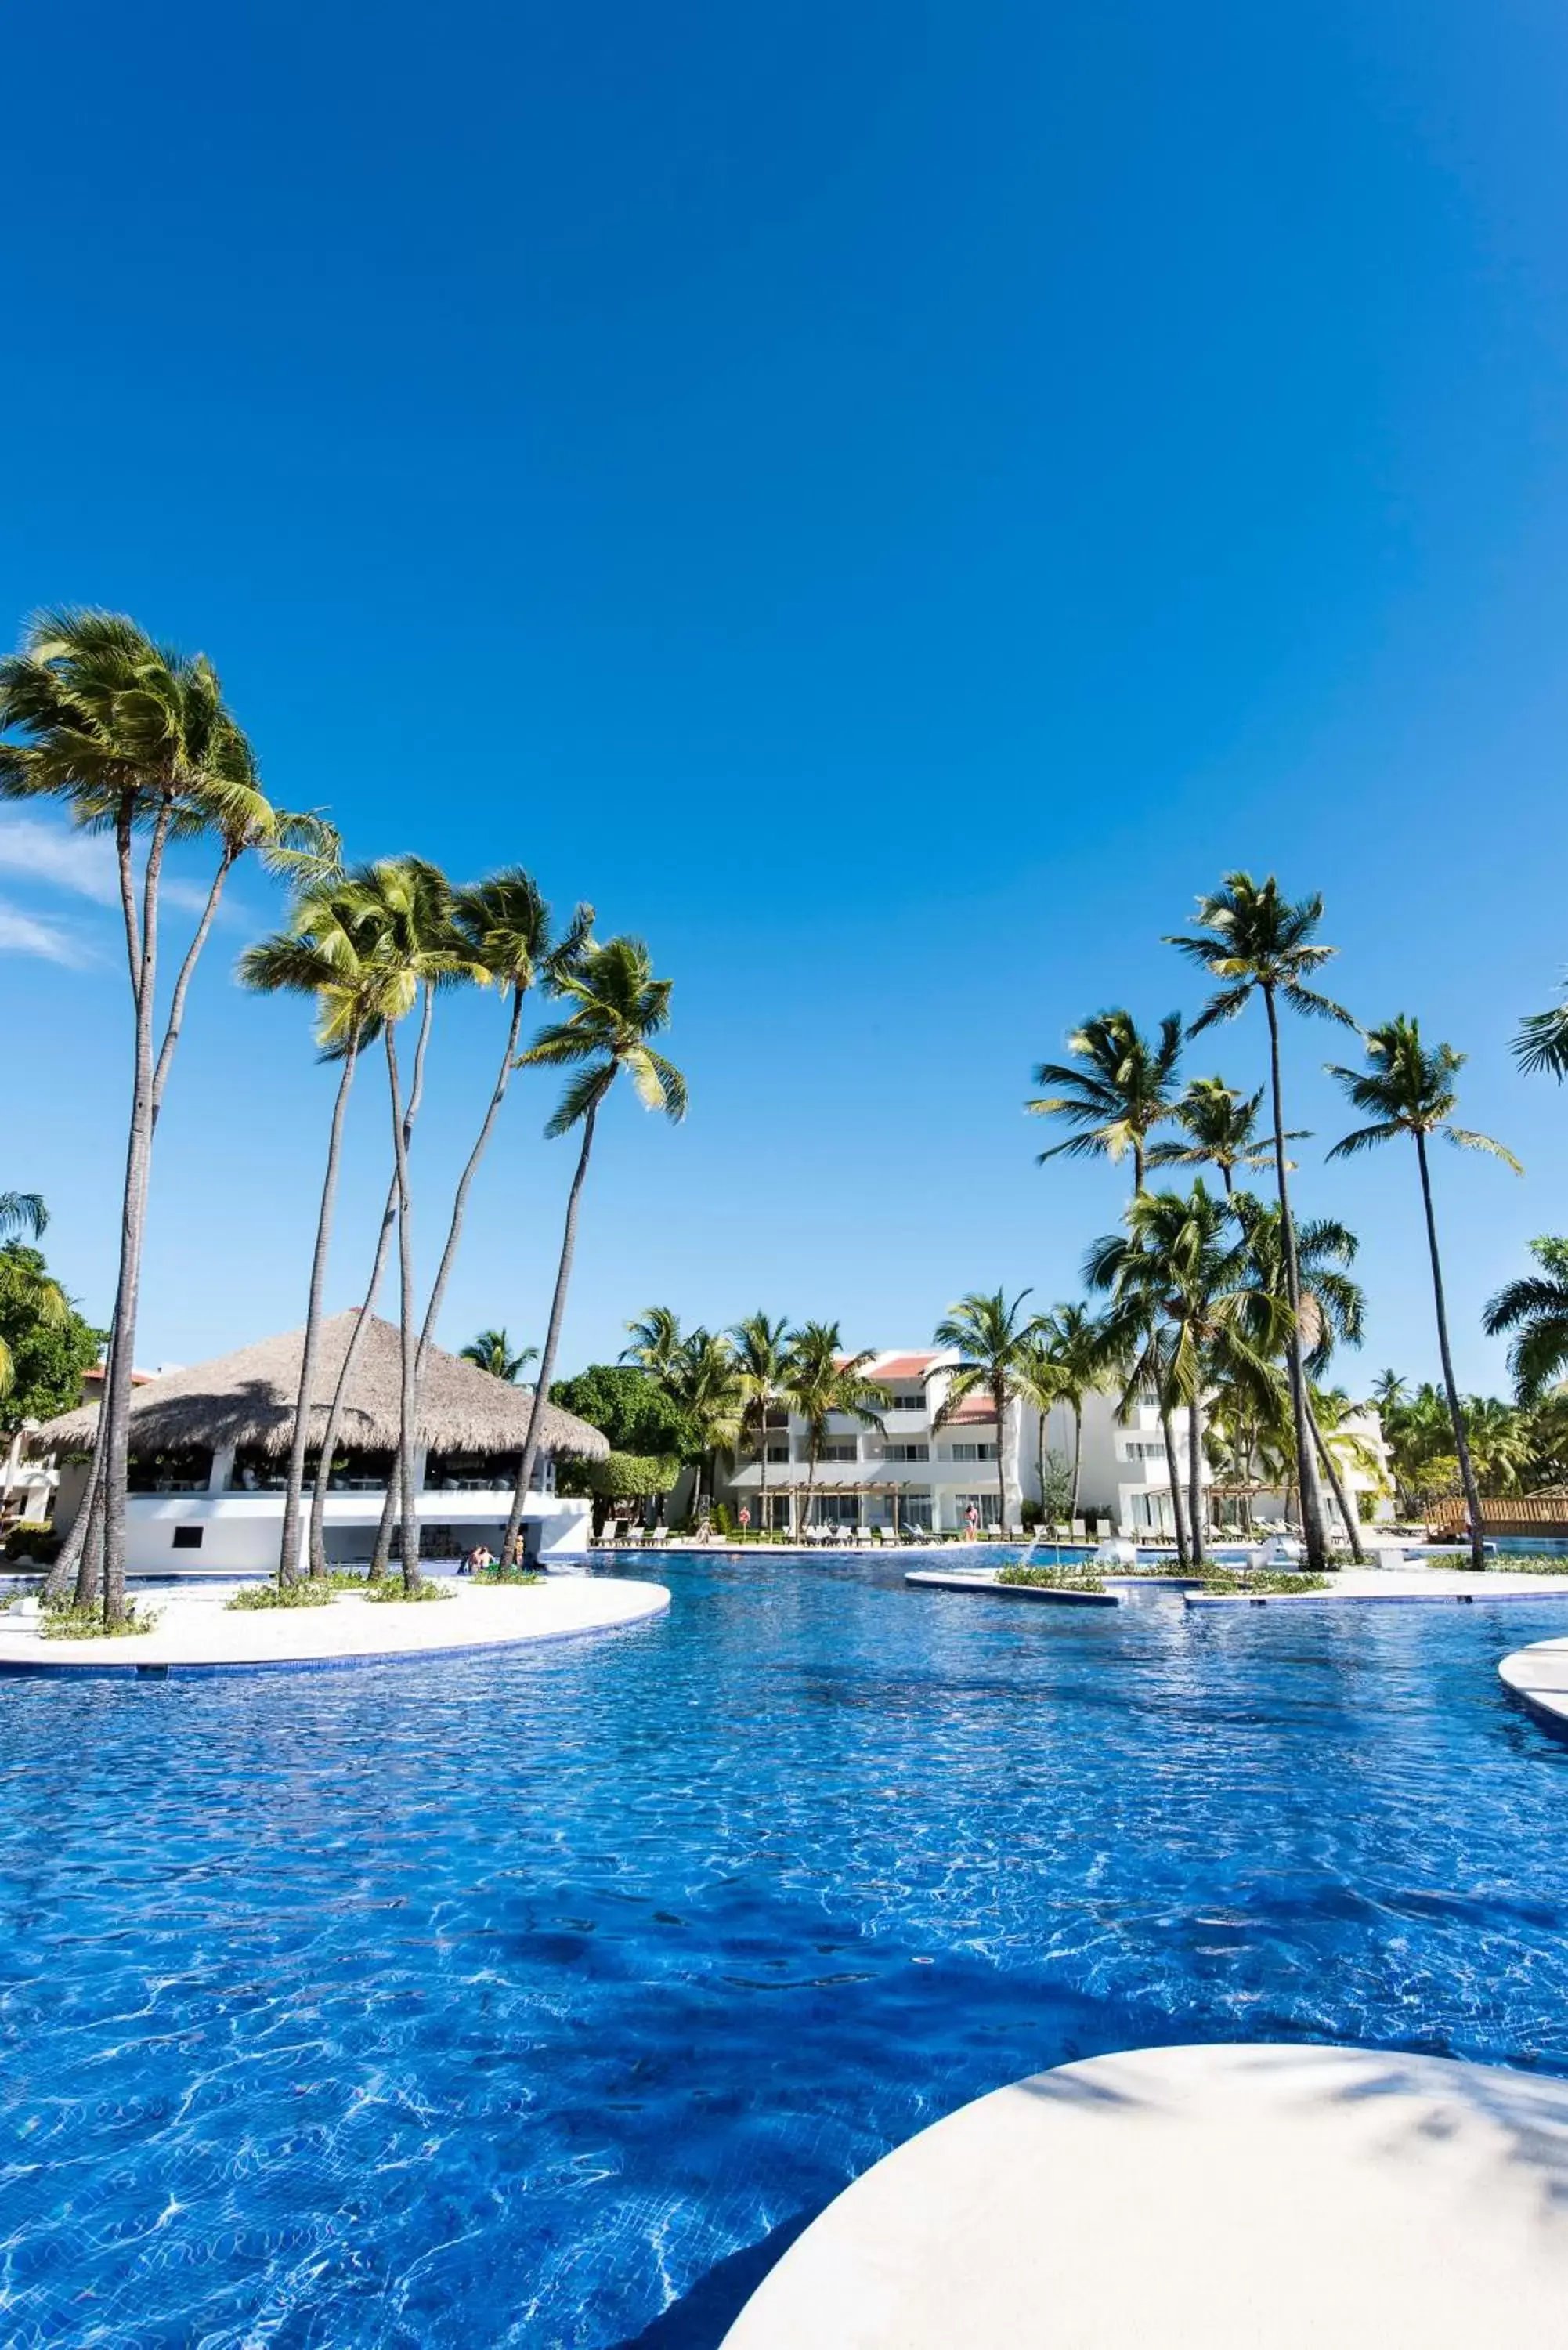 Swimming pool in Occidental Punta Cana - All Inclusive